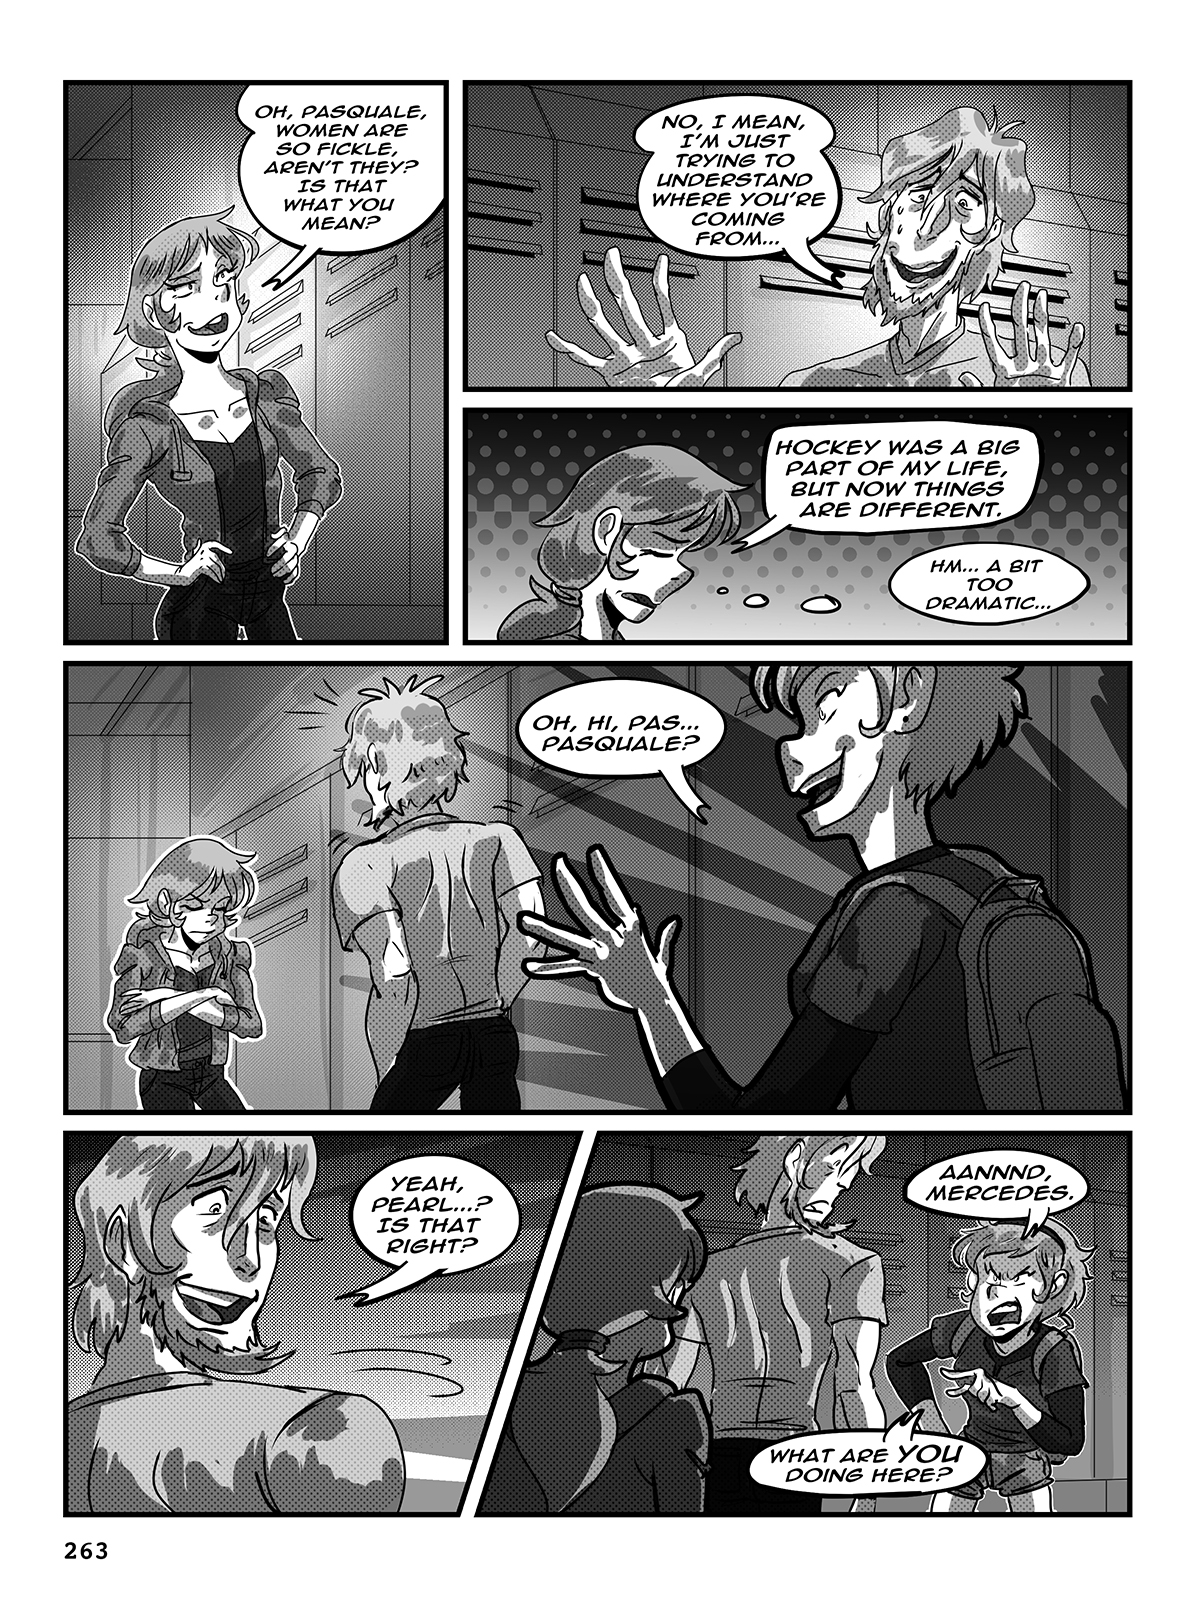 Hockey, Love, & GUTS! – Chapter 9 – Page 263